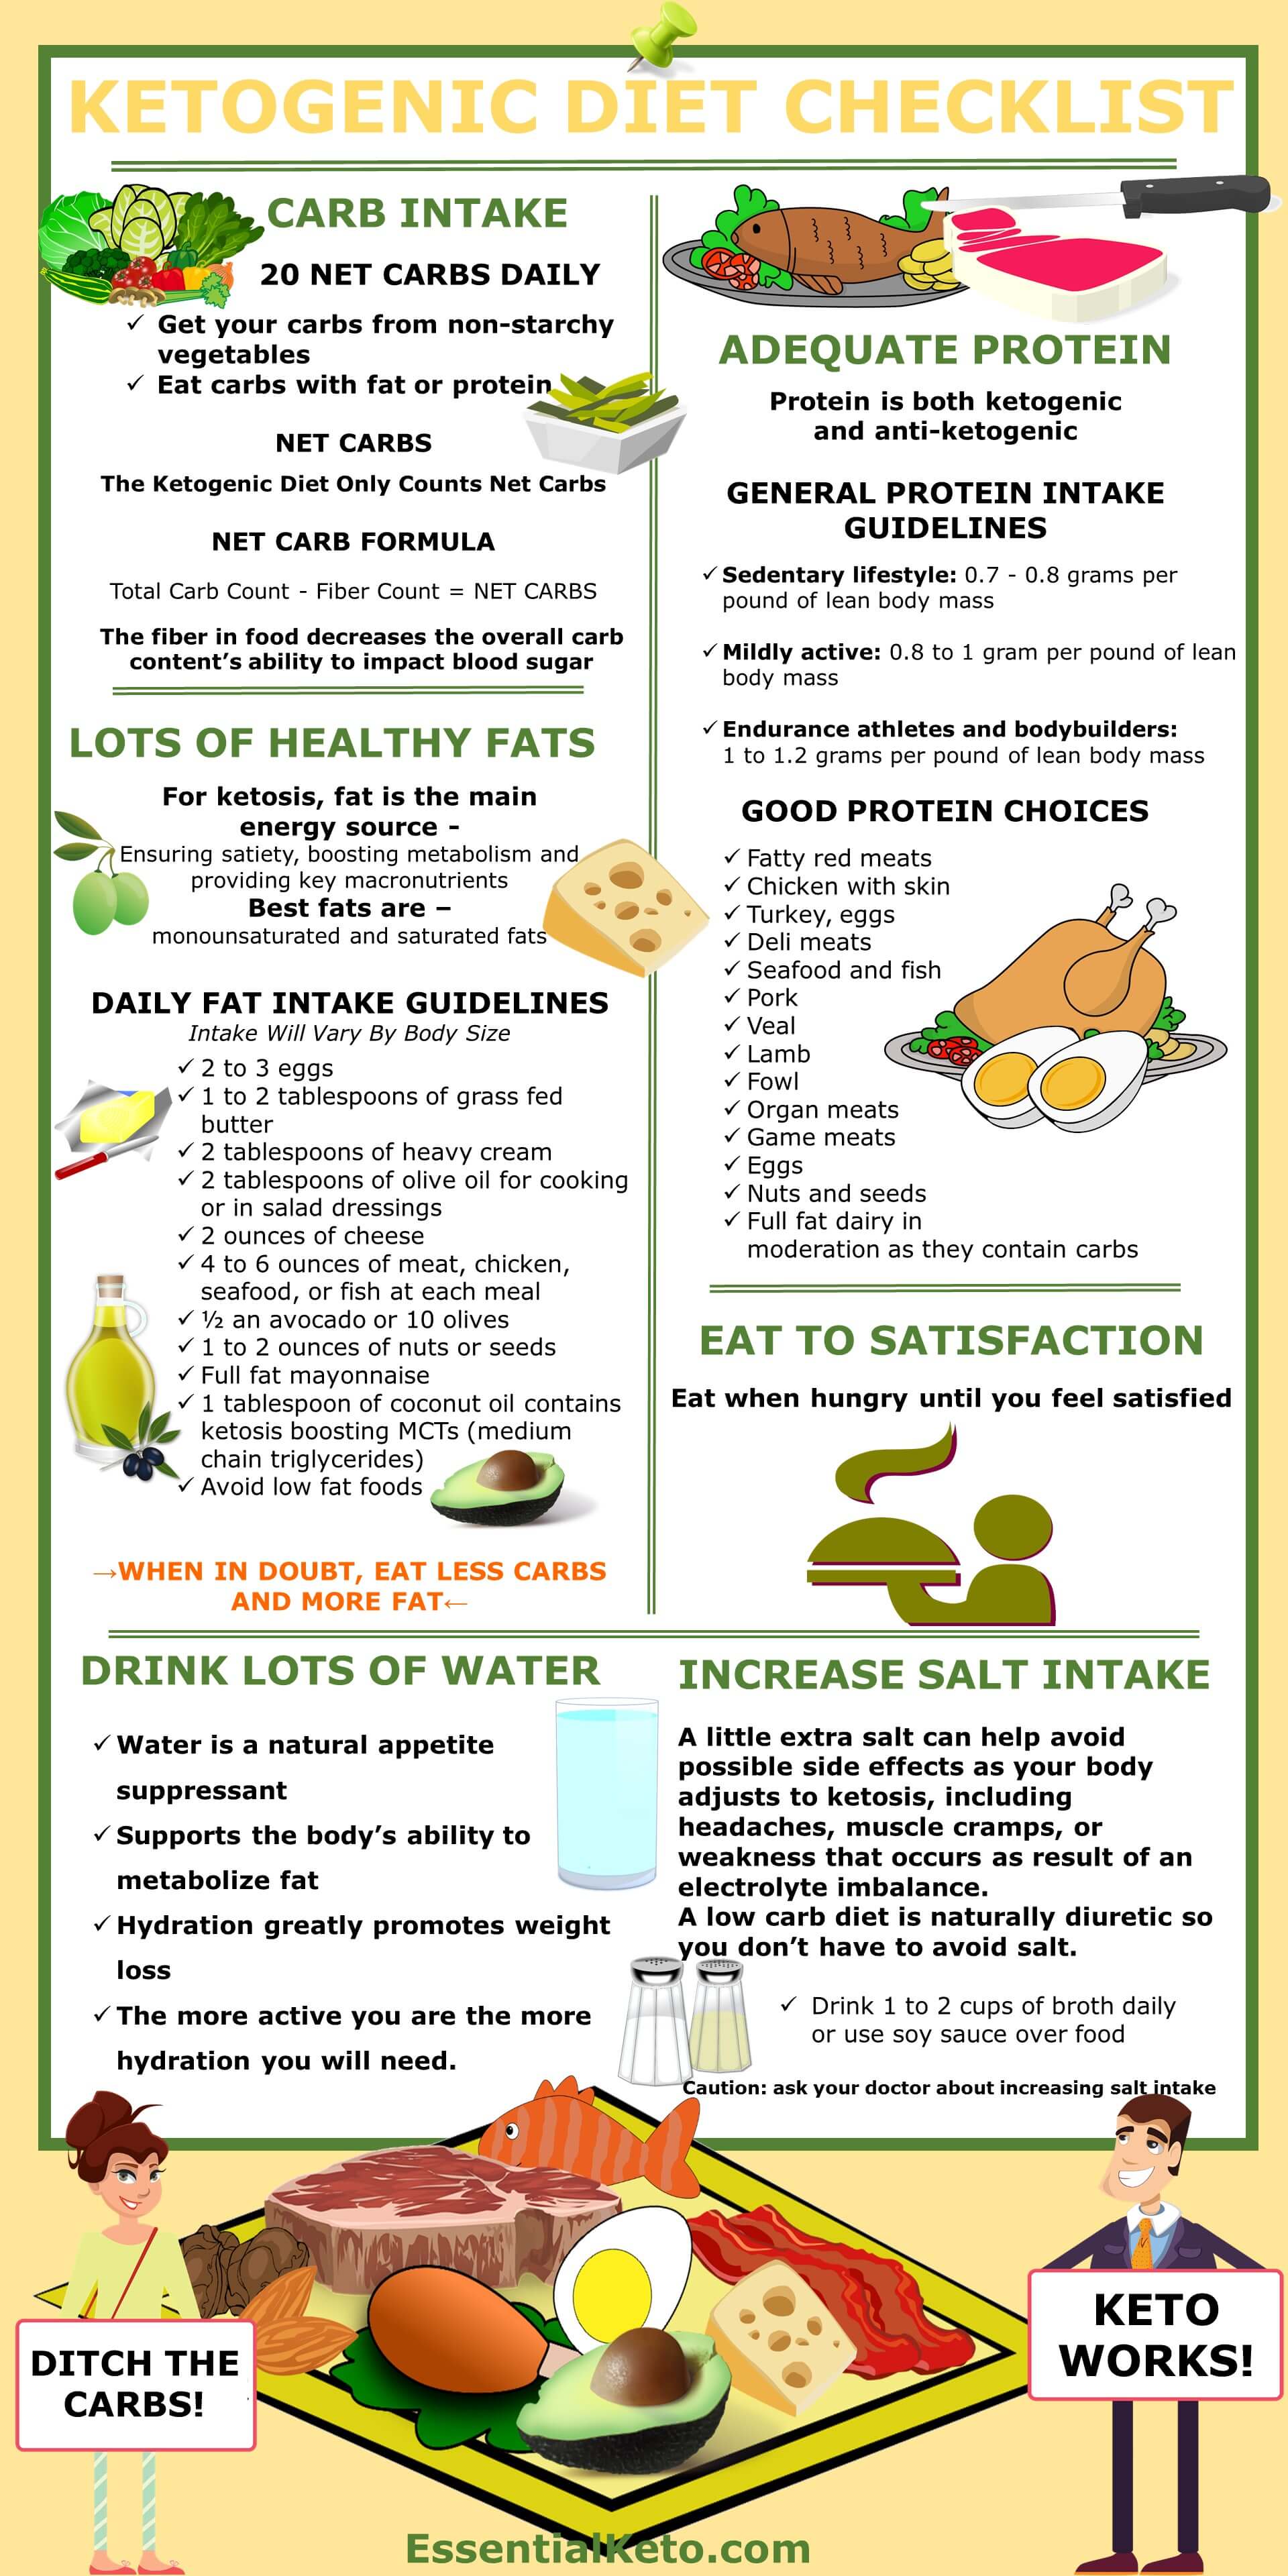 ketogenic-diet-9-keto-charts-to-help-keep-you-on-track-heall